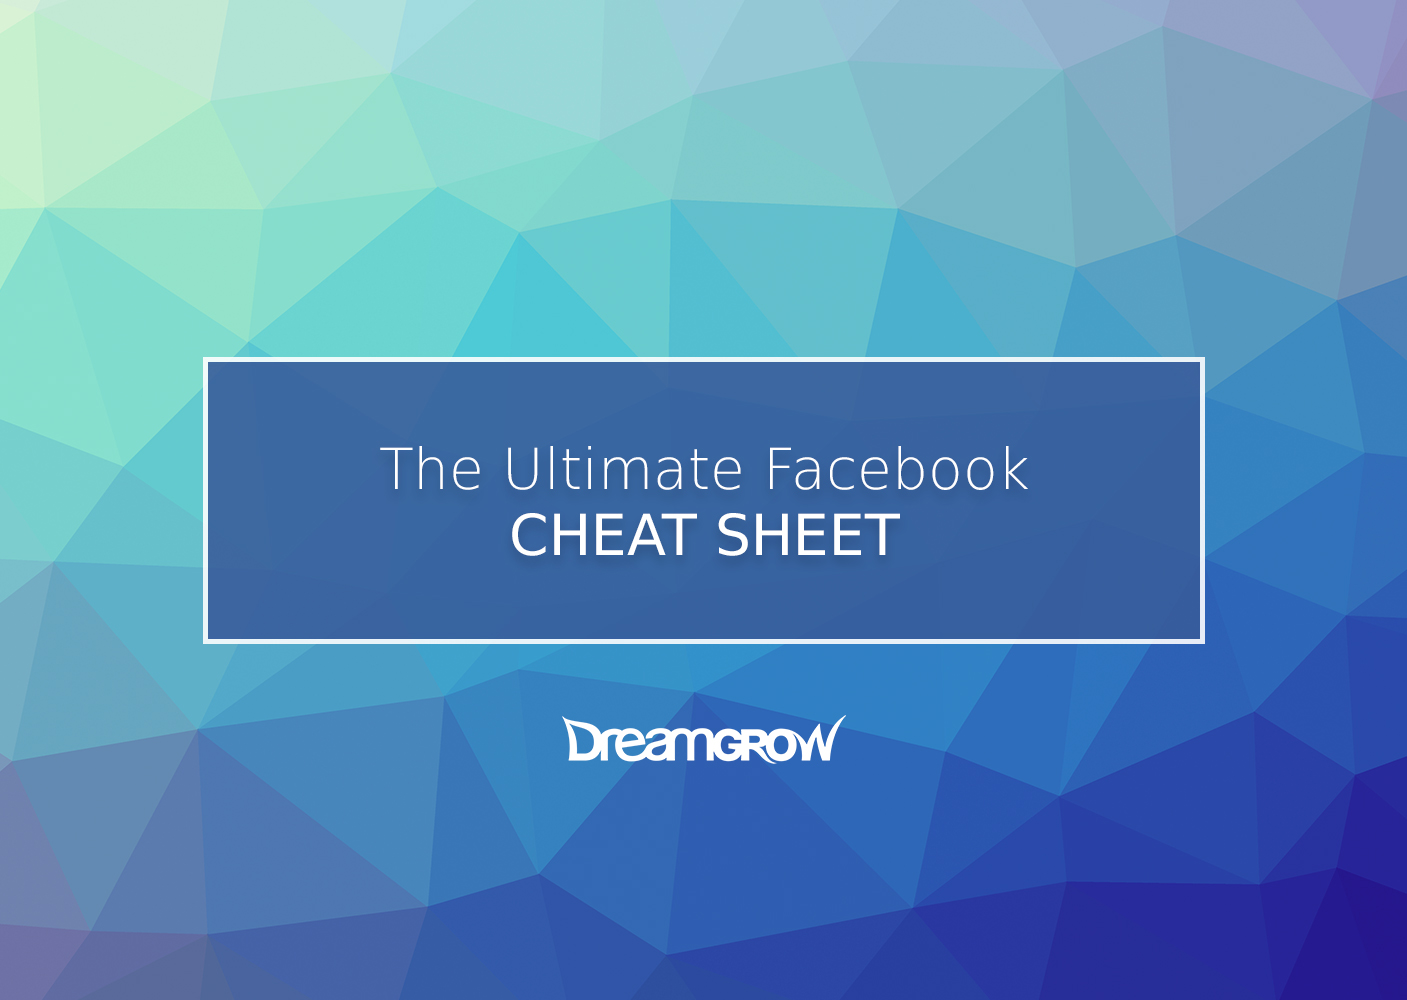 Facebook Cheat Sheet - Facebook Cover Image Size 2018 , HD Wallpaper & Backgrounds